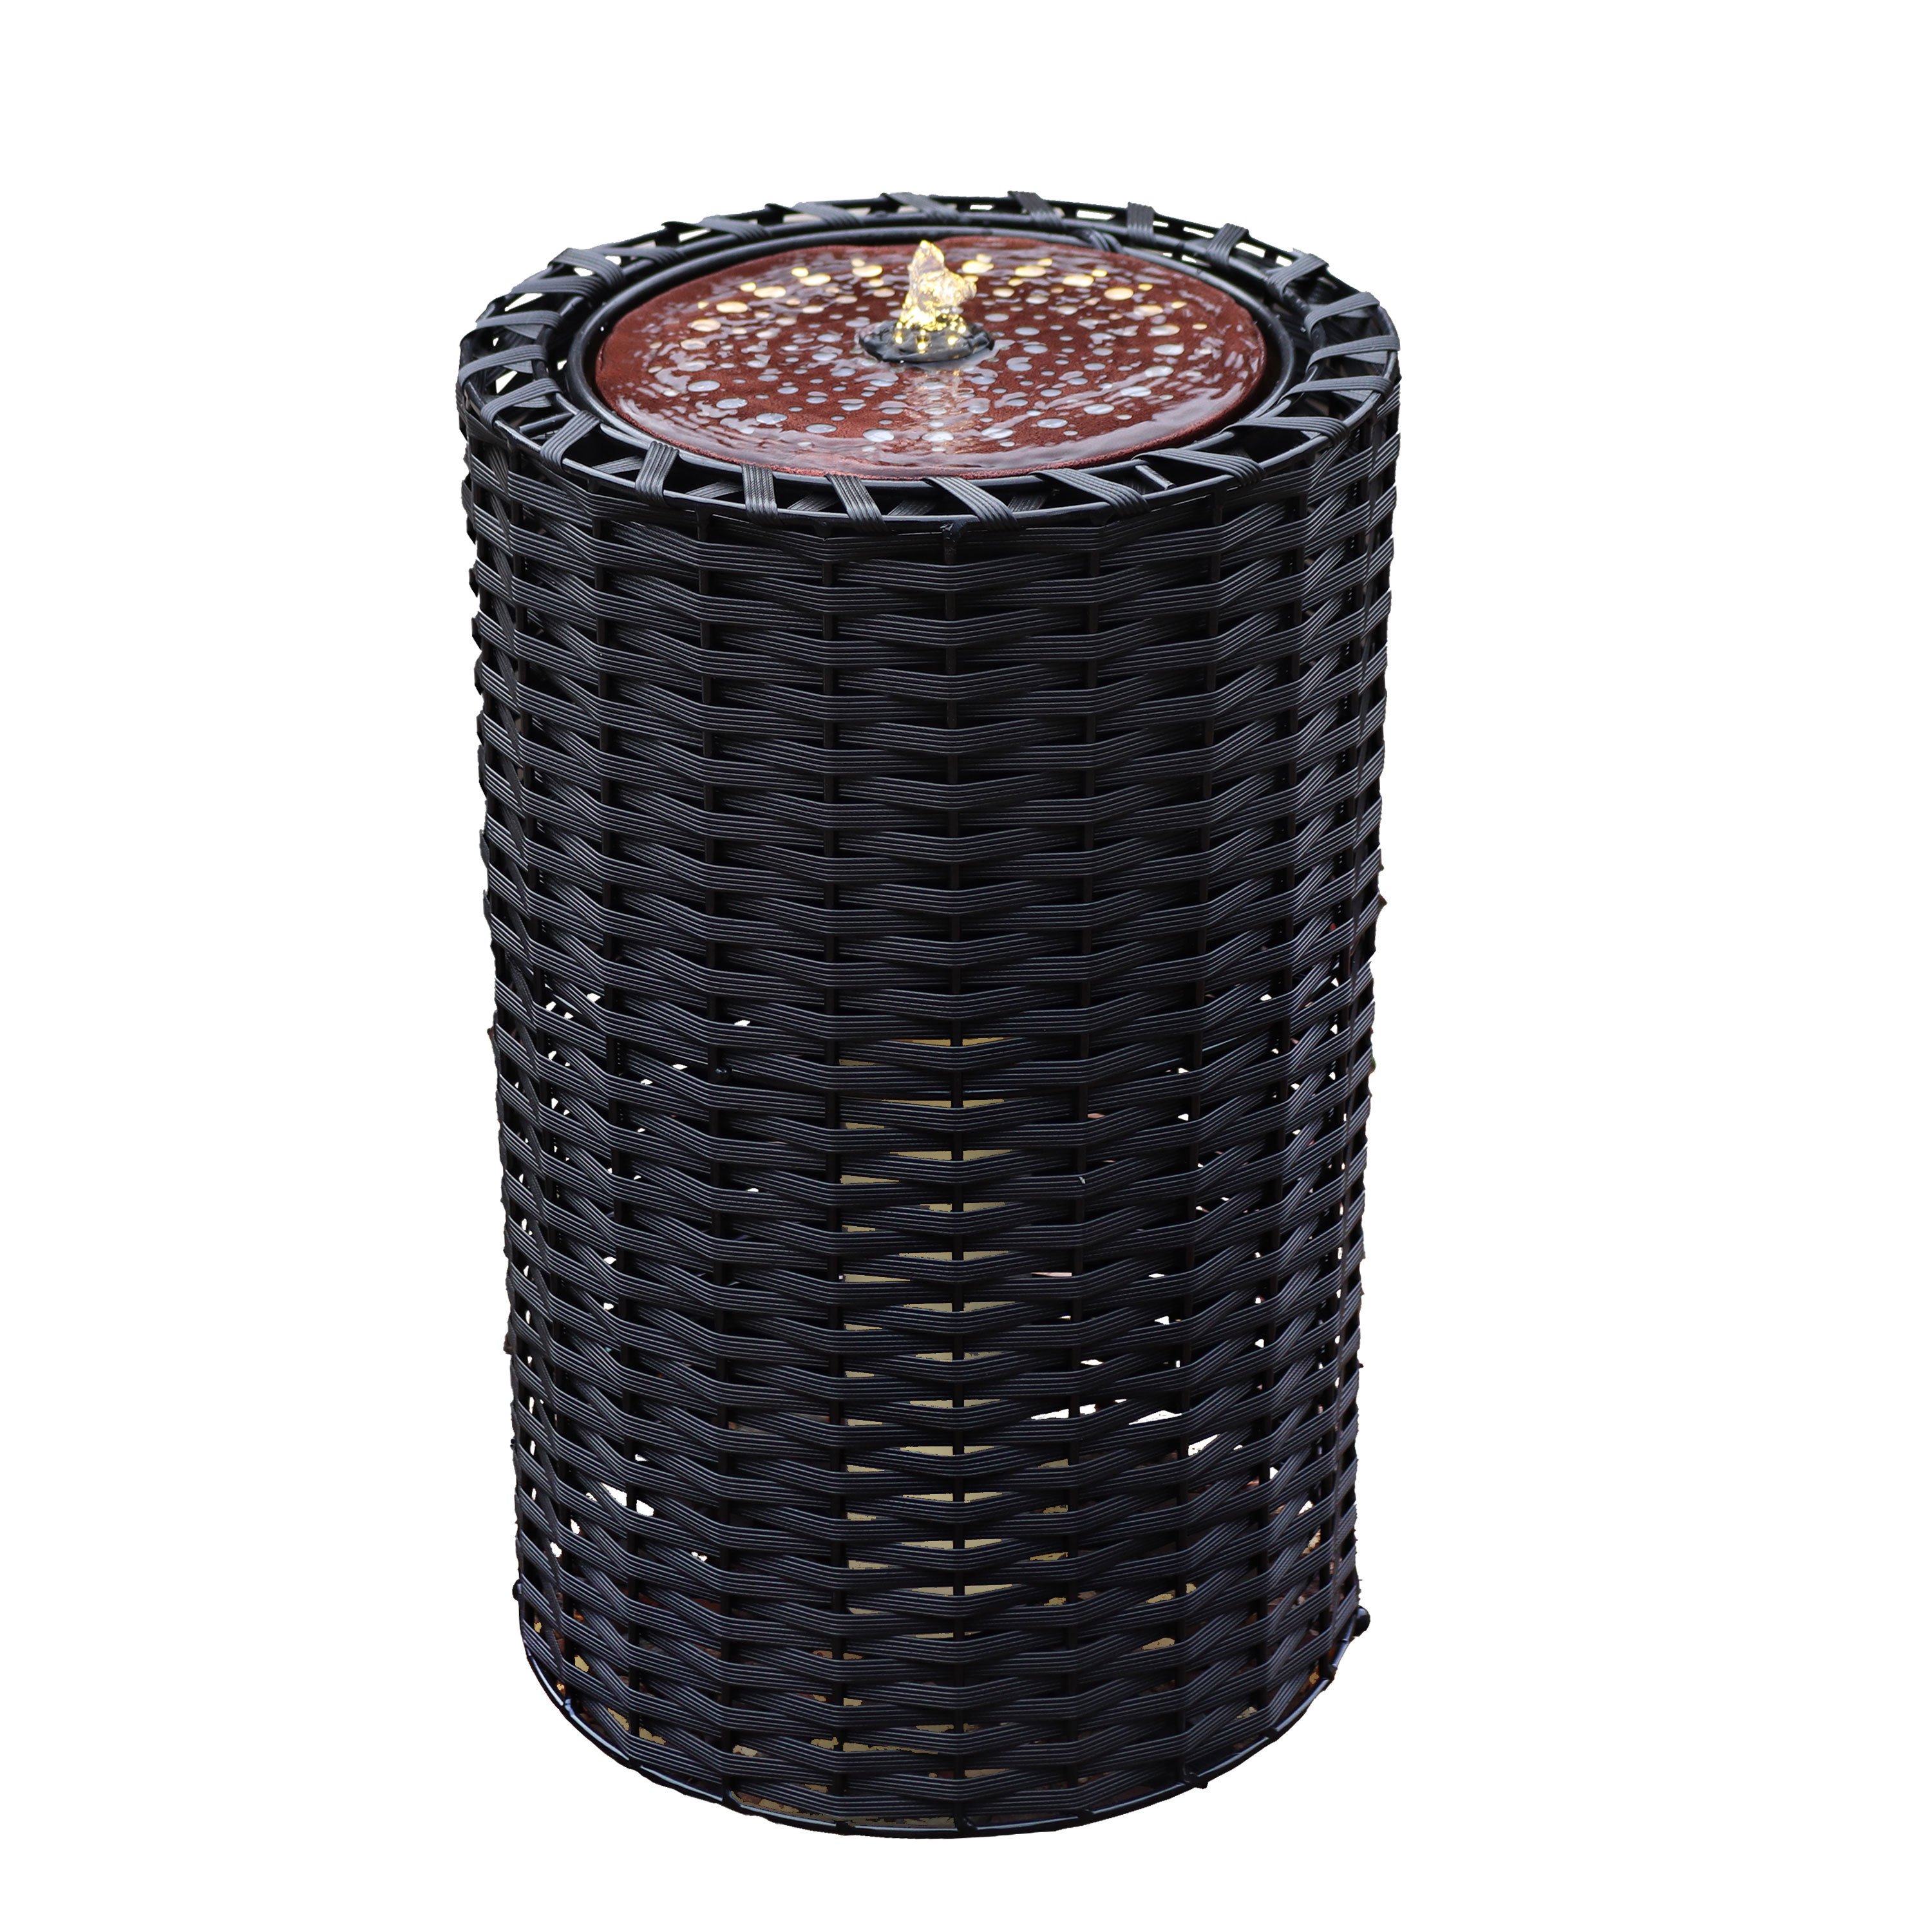 Plastic Wicker Indoor/Outdoor Cylinder Fountain with LED Lights